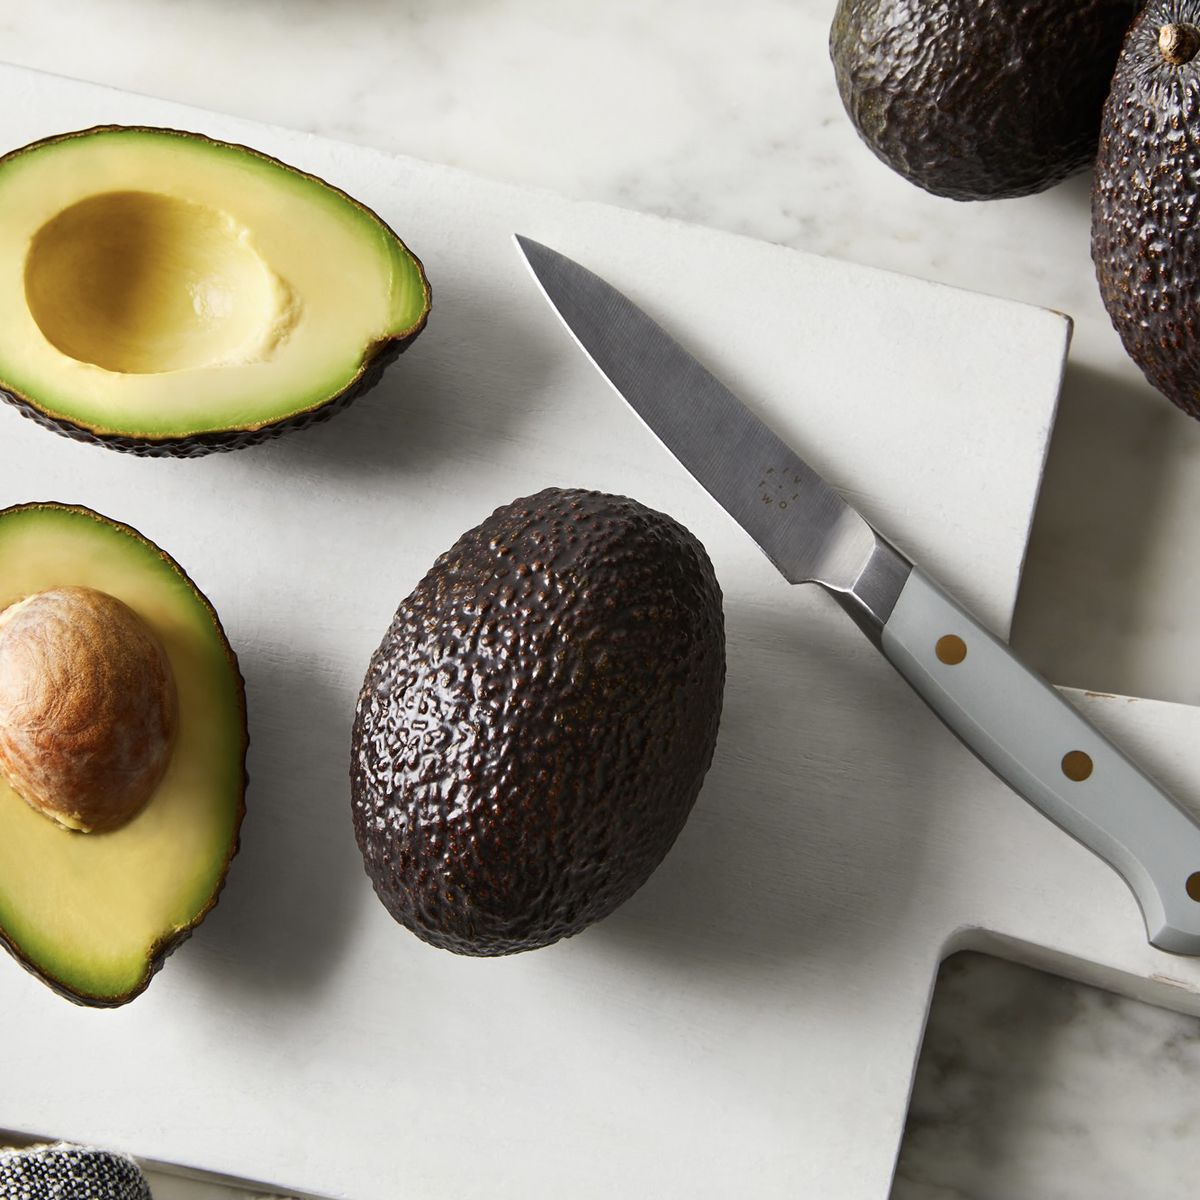 Kitchen Questions: How to Keep a Cut Avocado Fresh?